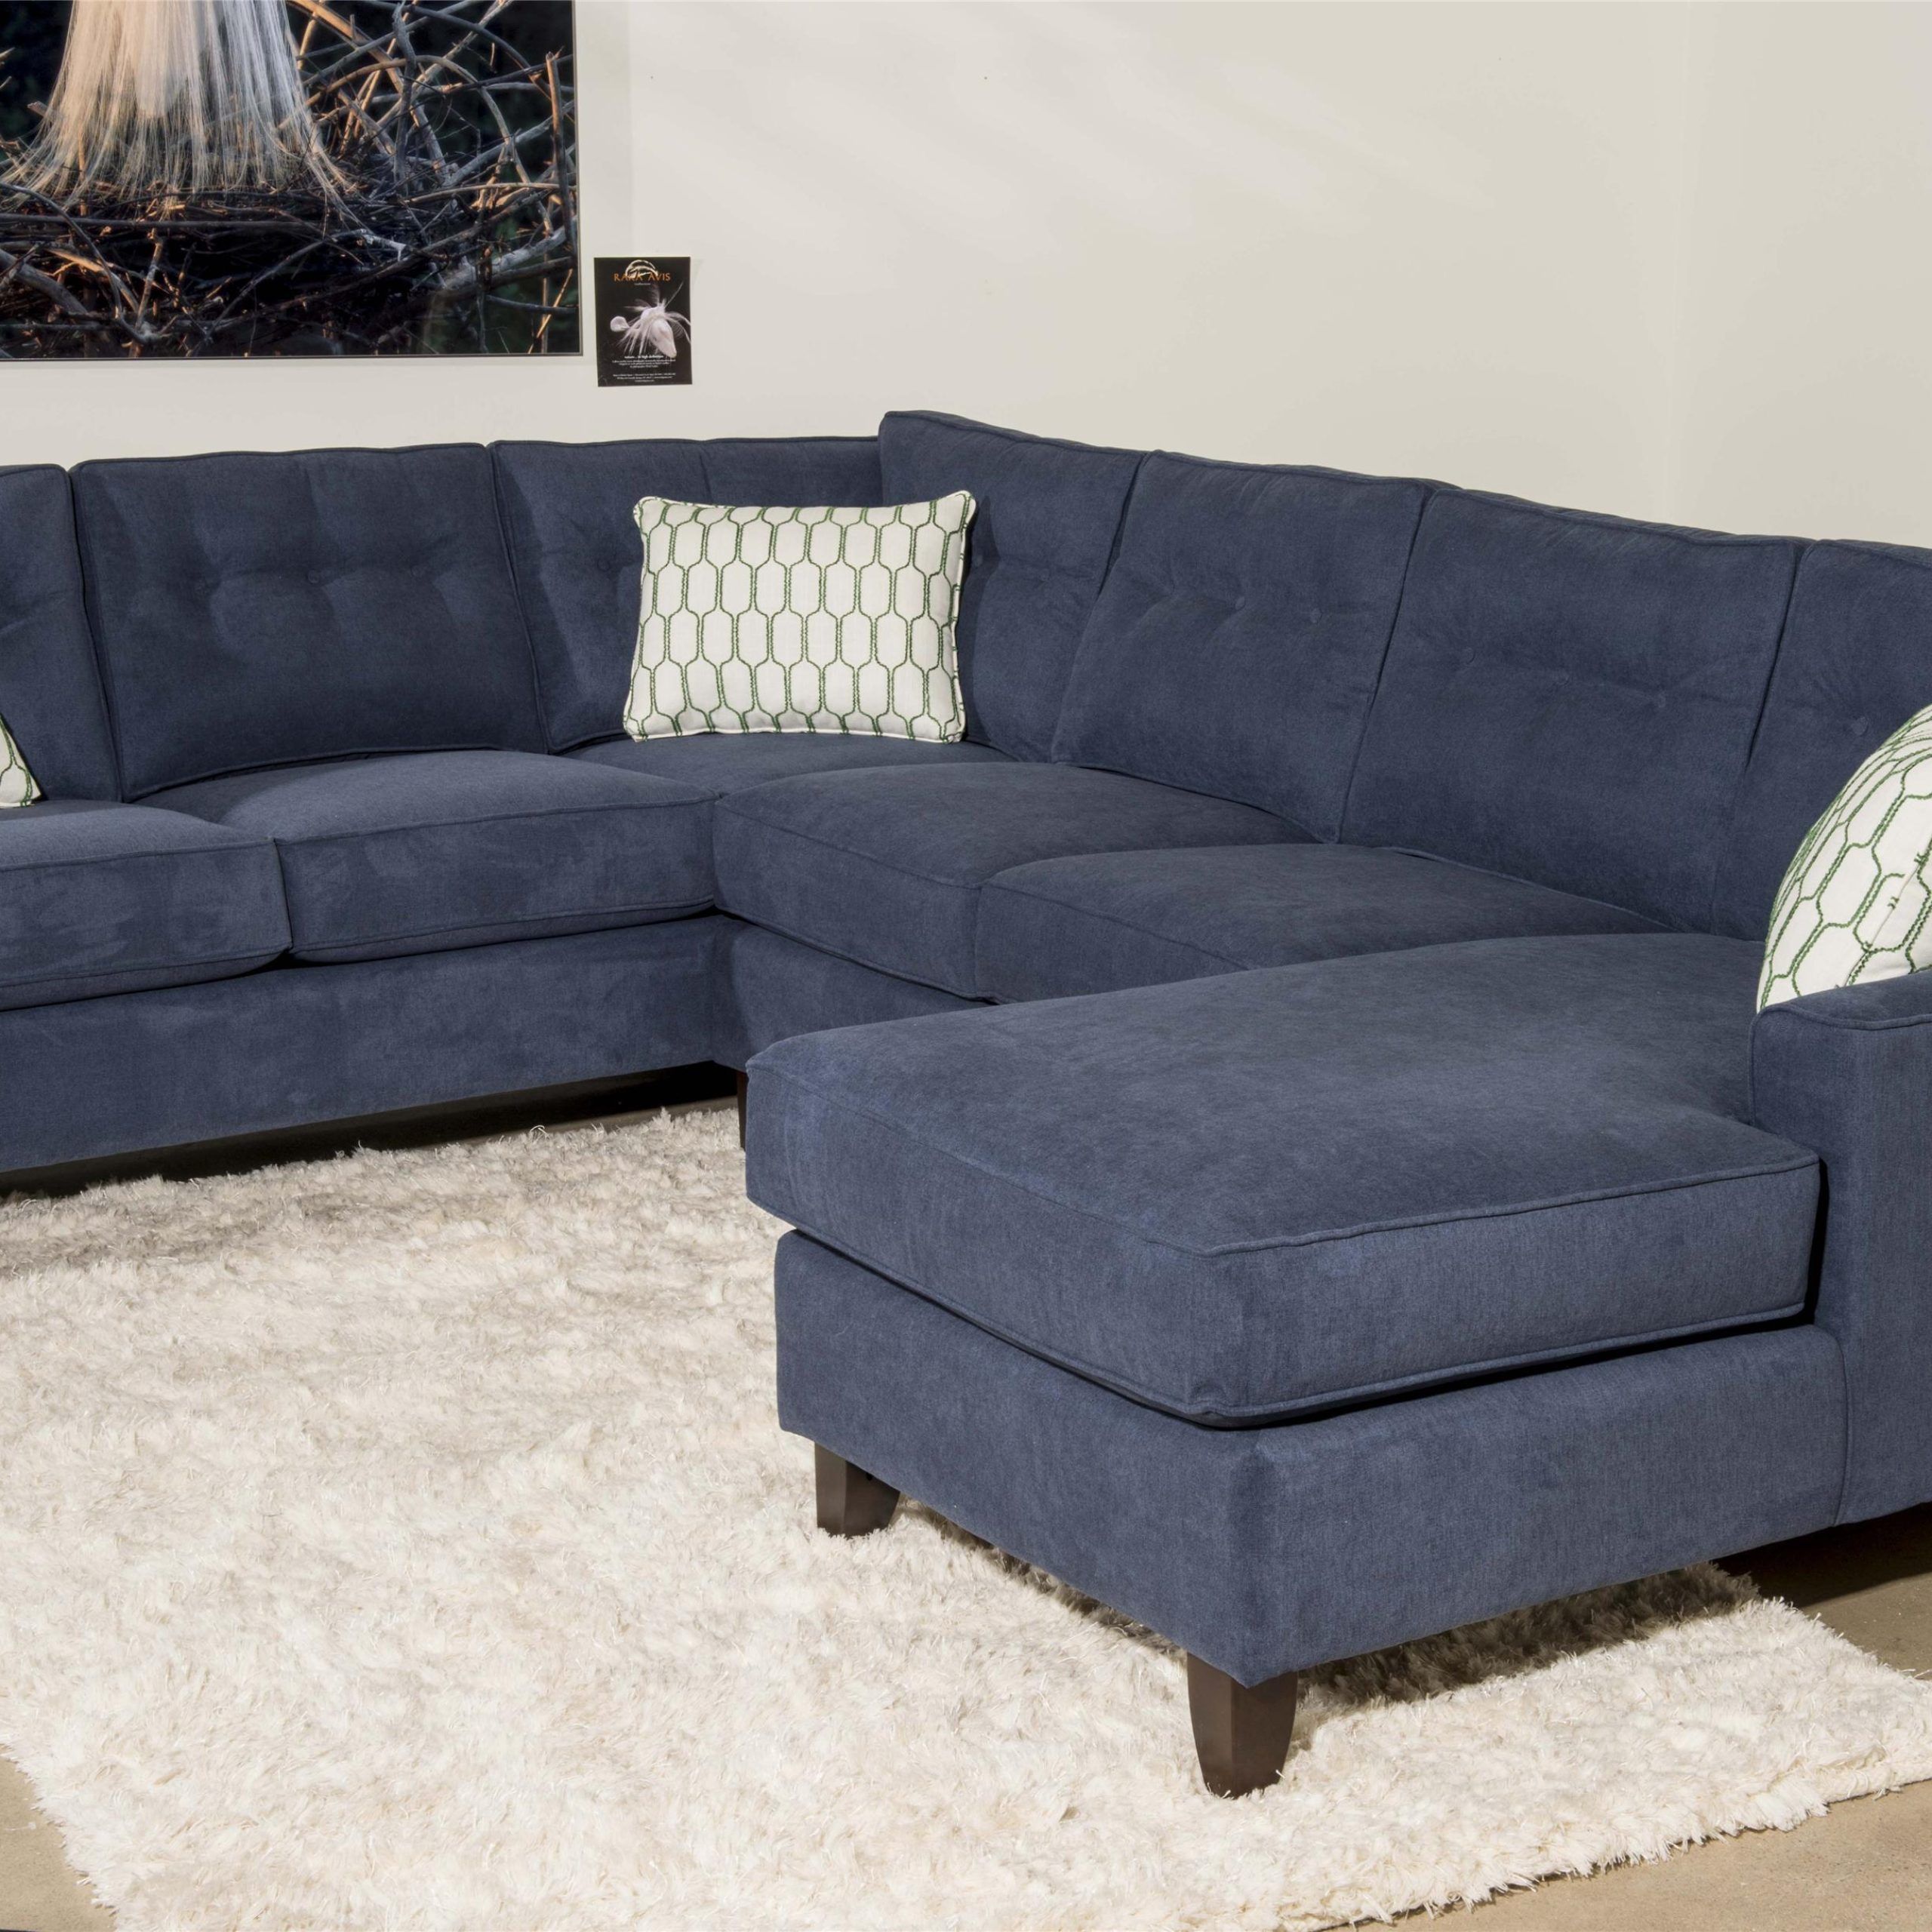 Most Current Audrina Contemporary 3 Piece Sectional Sofa With Chaiseklaussner For 3 Piece Leather Sectional Sofa Sets (View 11 of 15)